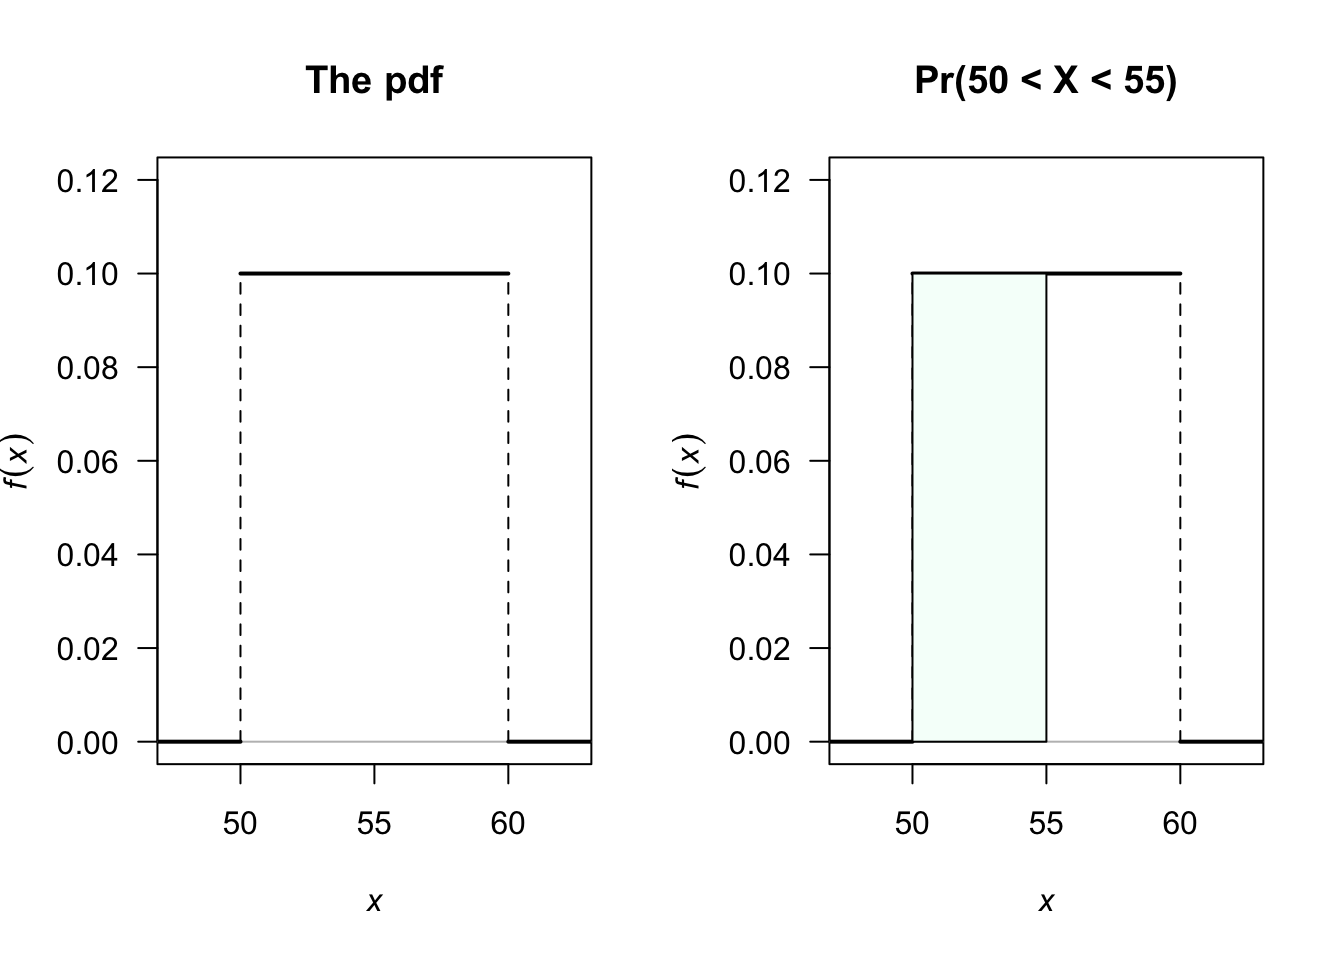 Left panel: A continuous uniform distribution defined for $50<x<60$. Right panel: Displaying the probability that the value of $X$ is between 50 and 55.